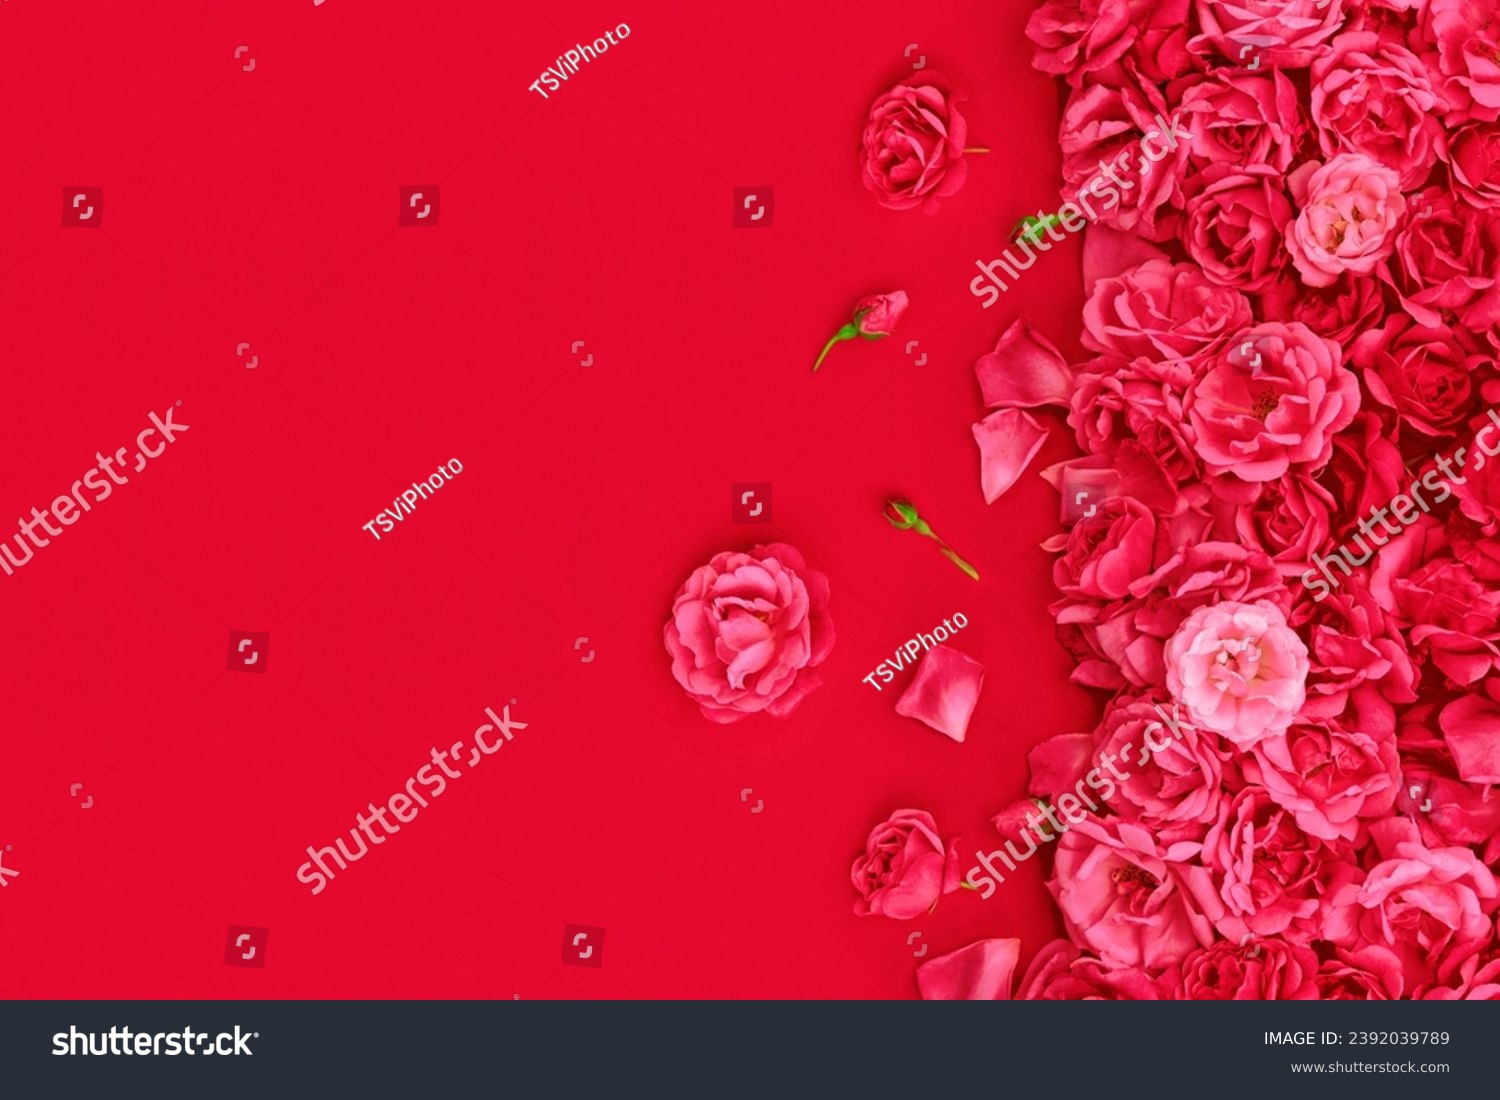 Red roses pattern background for design of invitation, greeting card, valentine, wallpaper. #2392039789